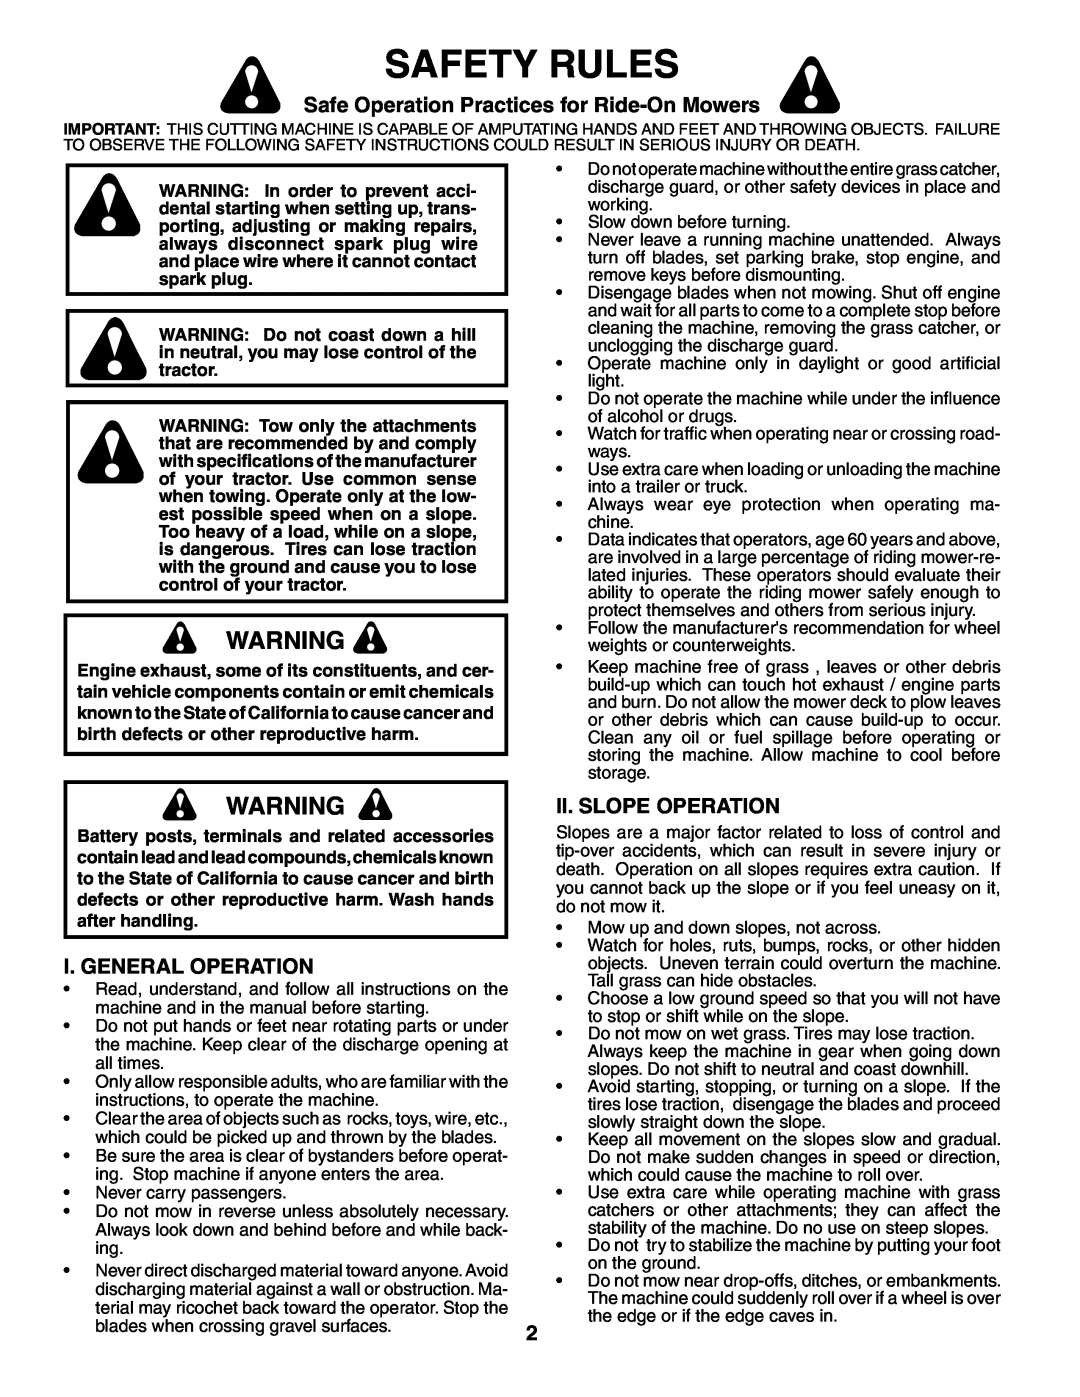 Ryobi 197788 manual Safety Rules, Safe Operation Practices for Ride-On Mowers, I. General Operation, Ii. Slope Operation 